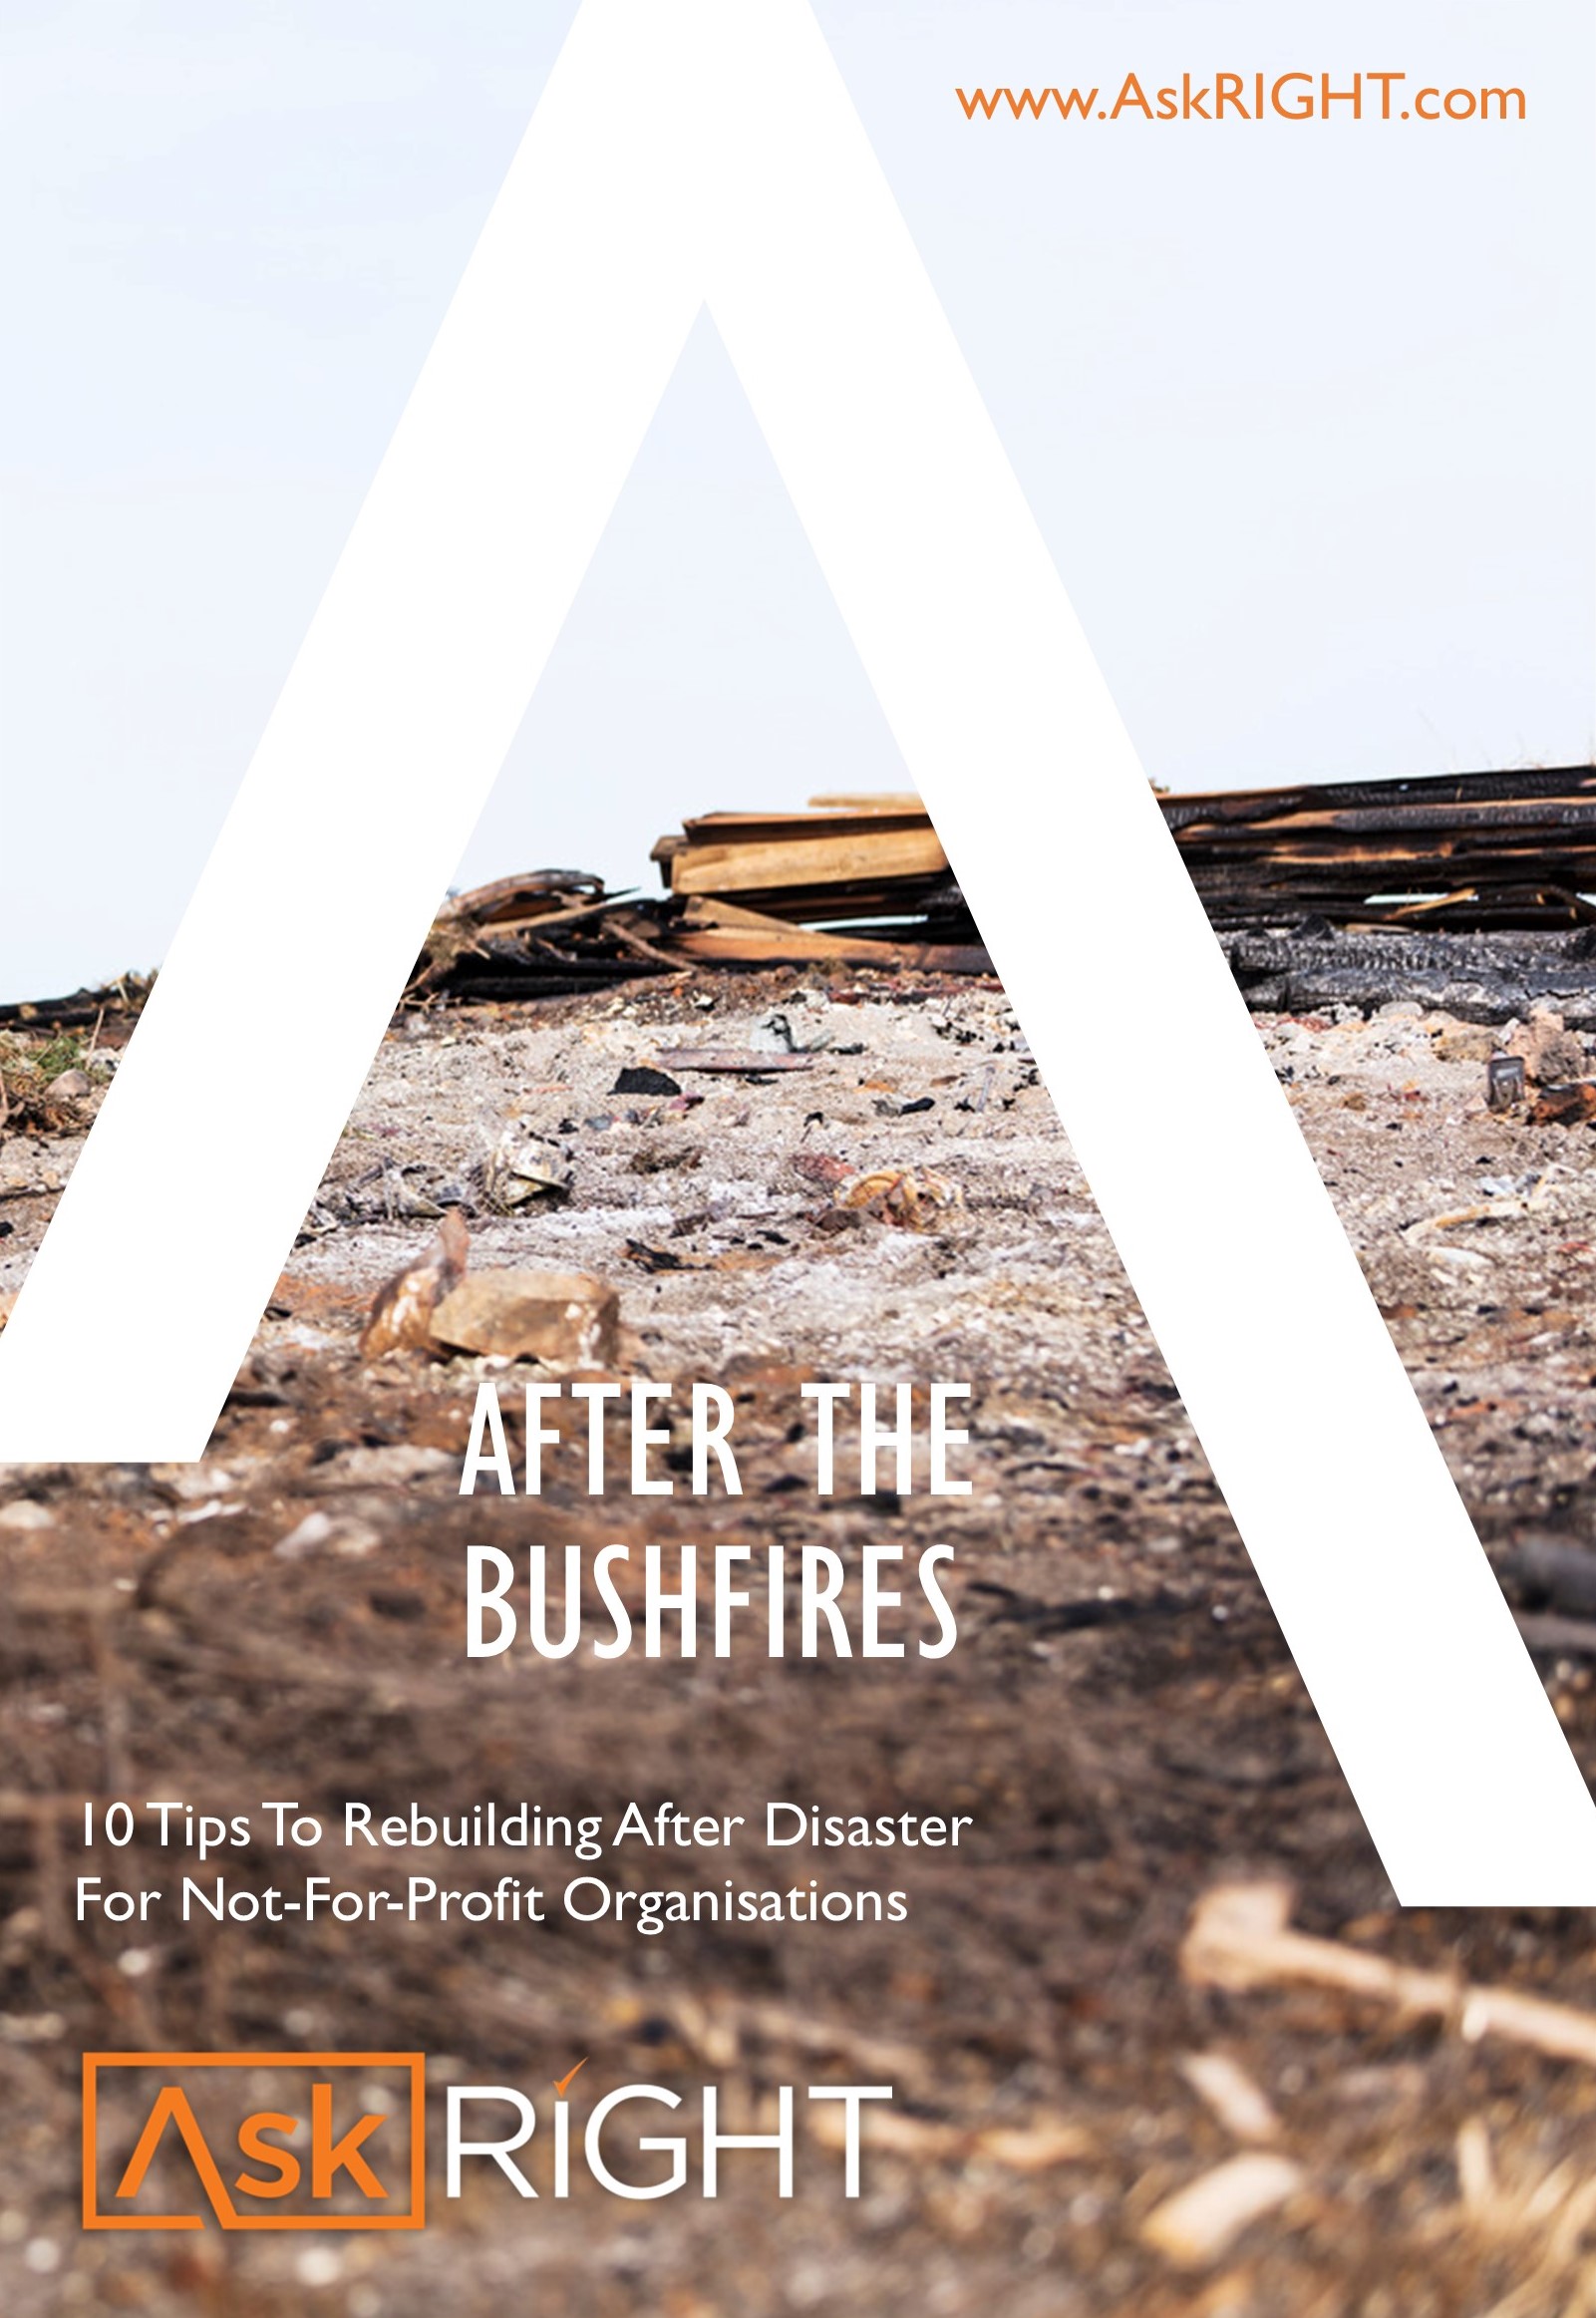 After the Bushfires: 10 tips to rebuilding after disaster for Not-For-Profit organisations